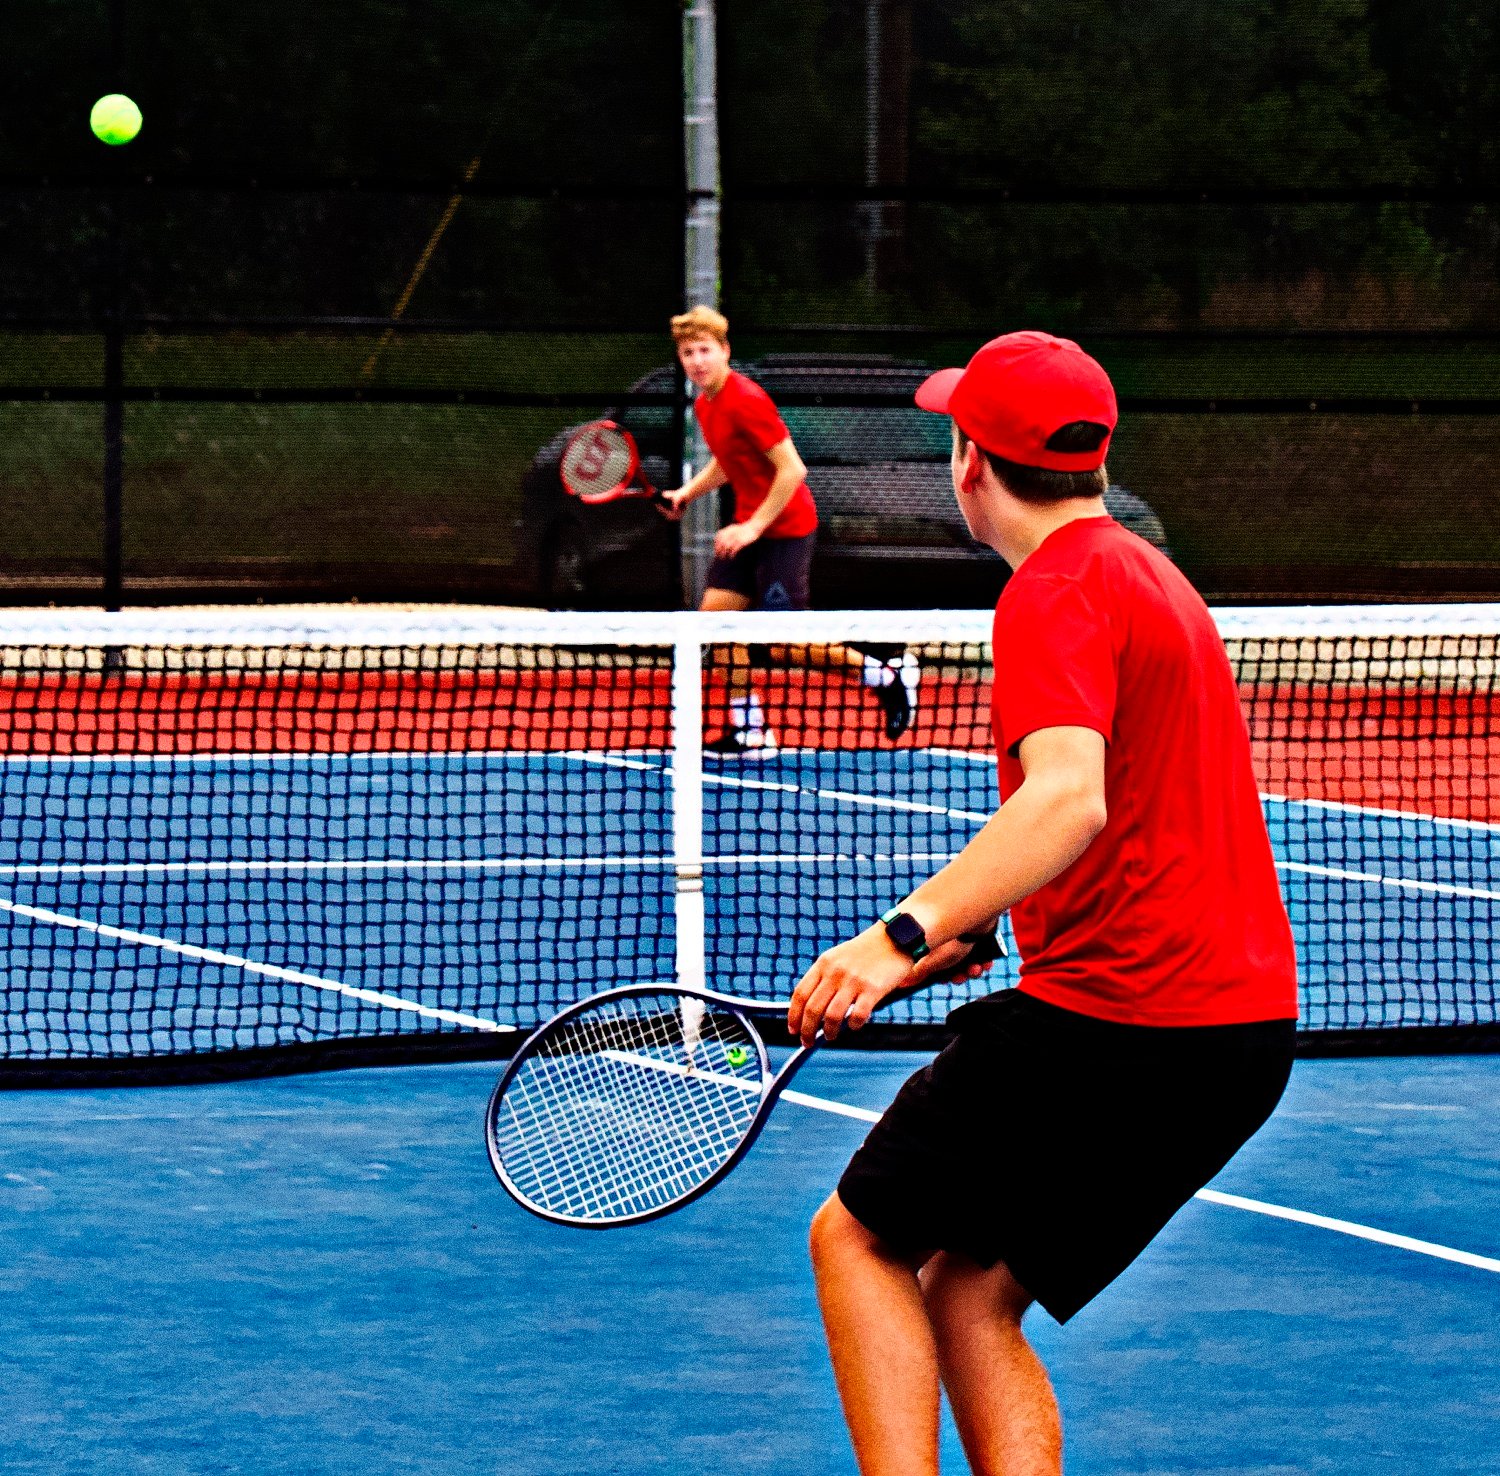 Will Hartin (background, left) and Cameron Gallyean face off for the district title. [see more shots]